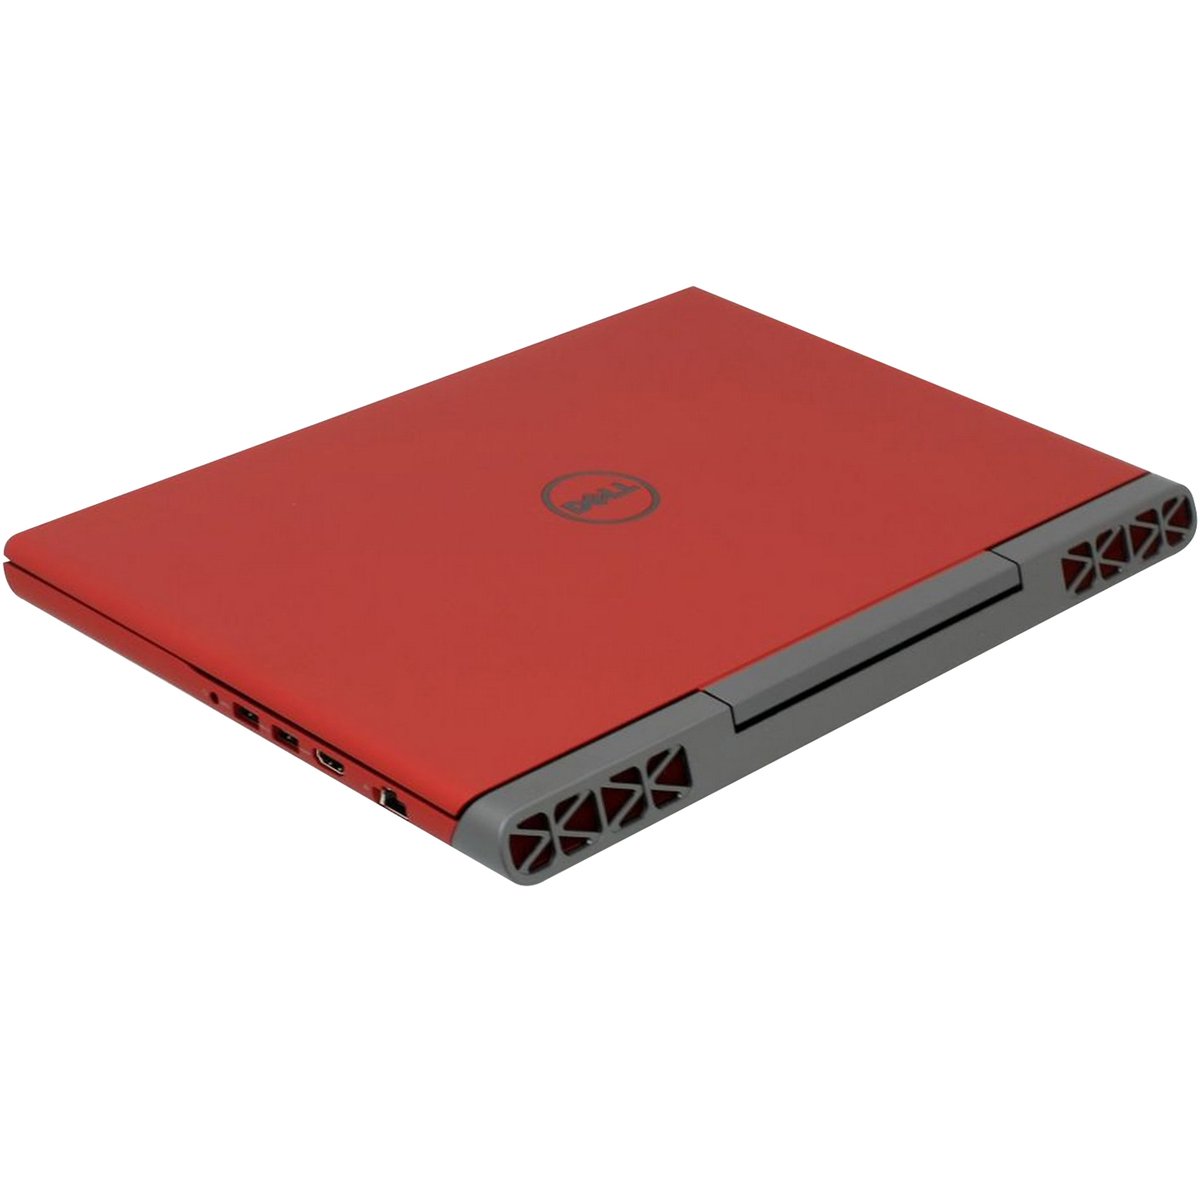 Dell Gaming Notebook inspiron 7567-1056 Core i5 Red